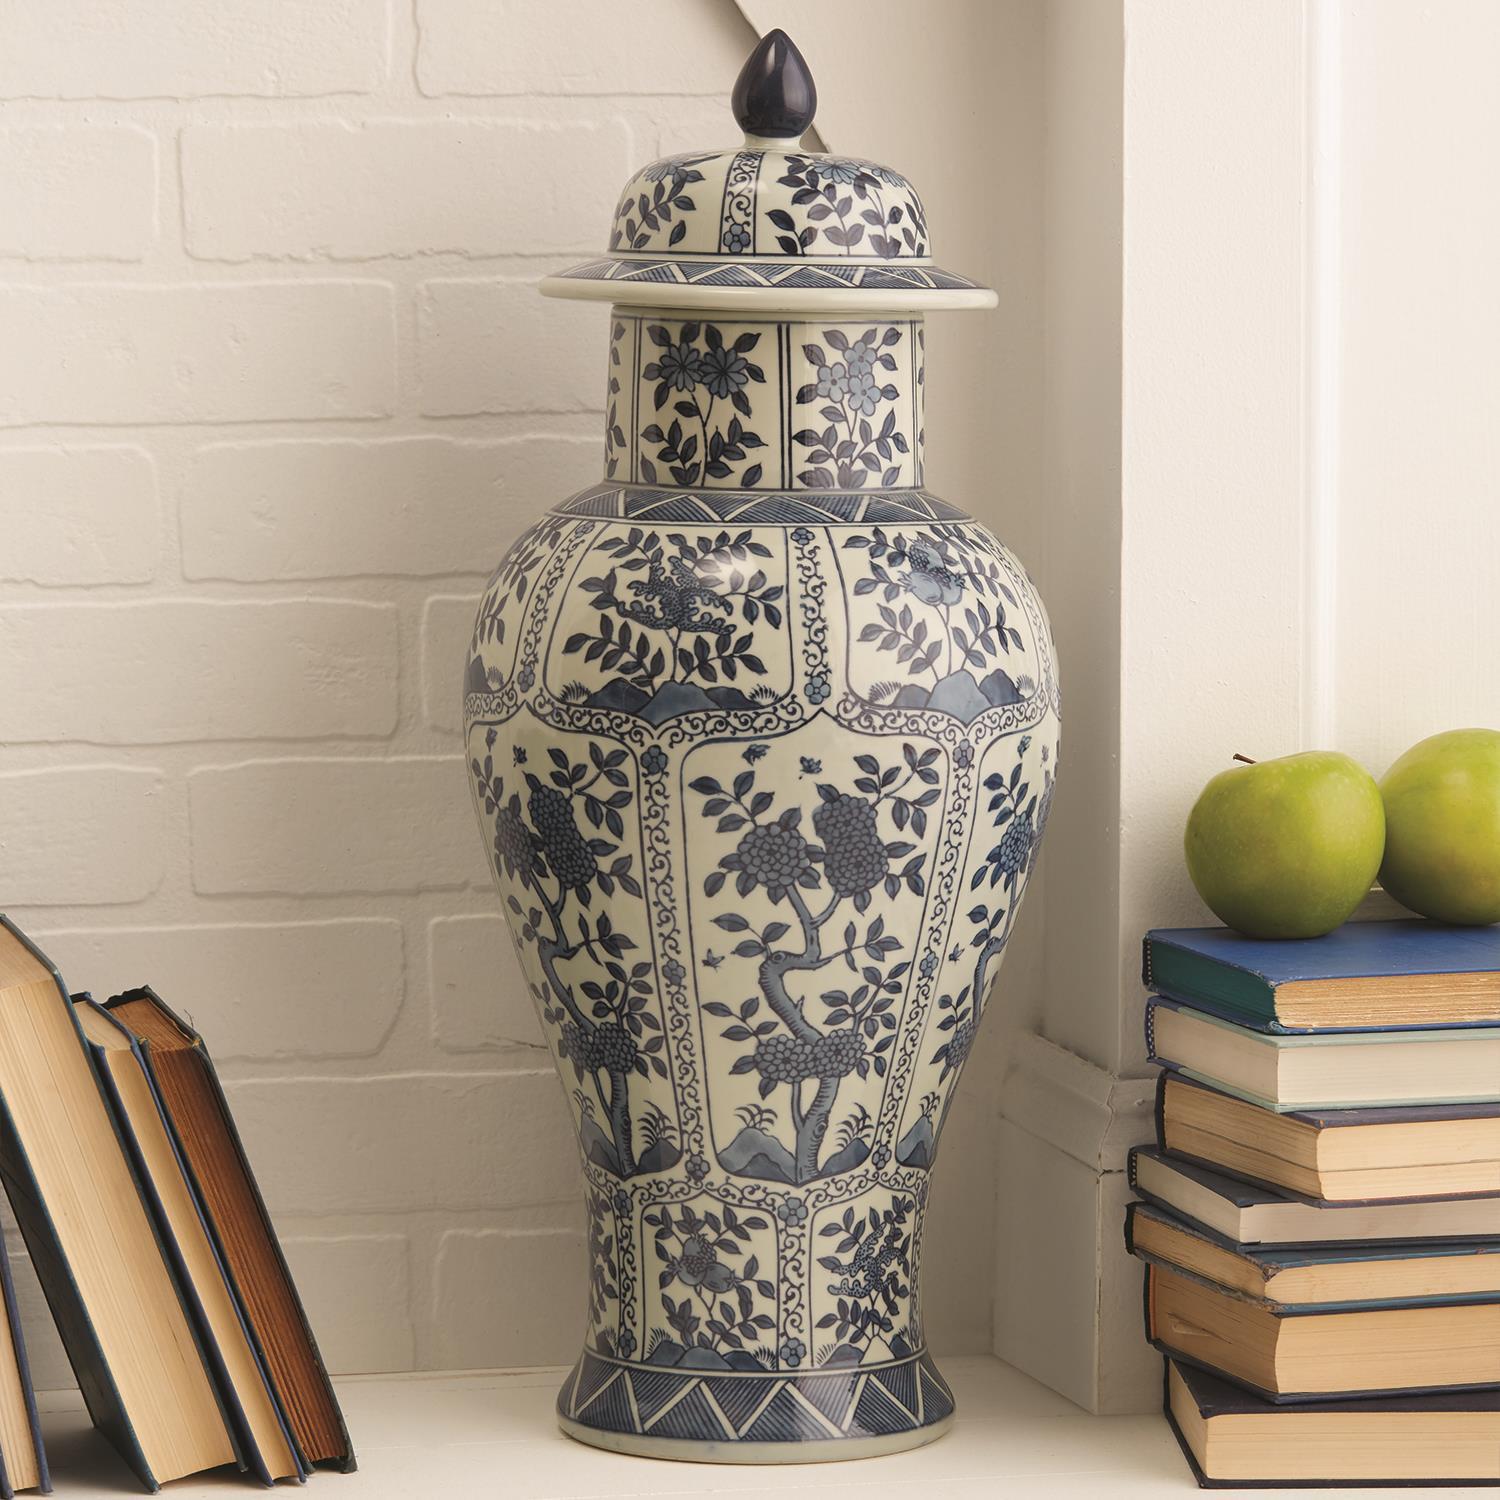 Two's Company Blue and White Chrysanthemum Flower Covered Temple Jar - Hand-Painted Porcelain